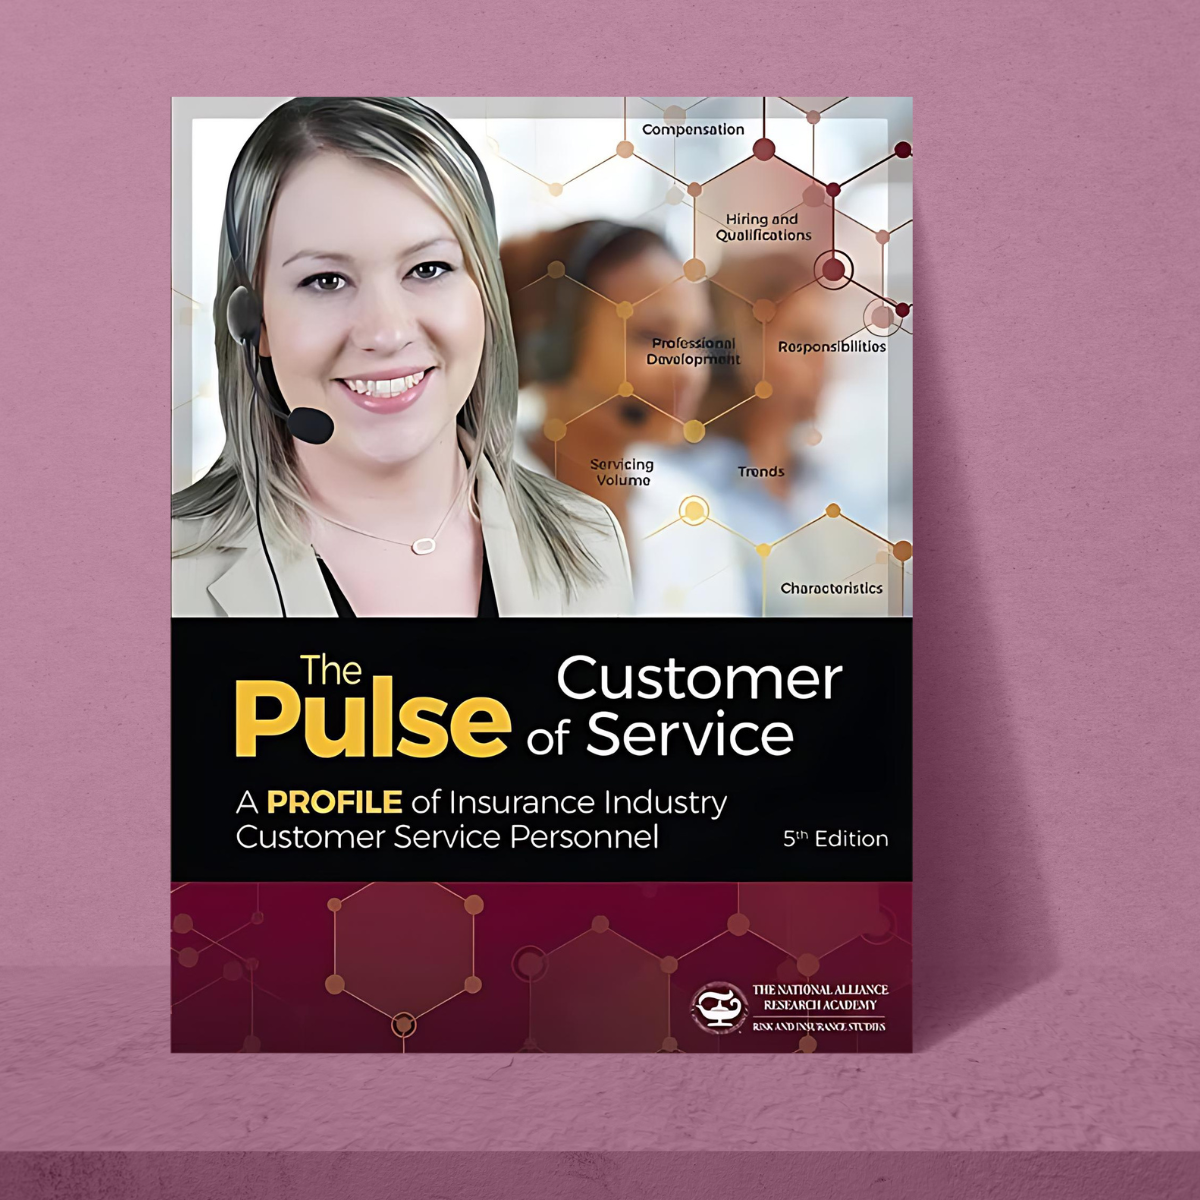 The Pulse of Customer Service: A Profile of Insurance Industry Customer Service Personnel